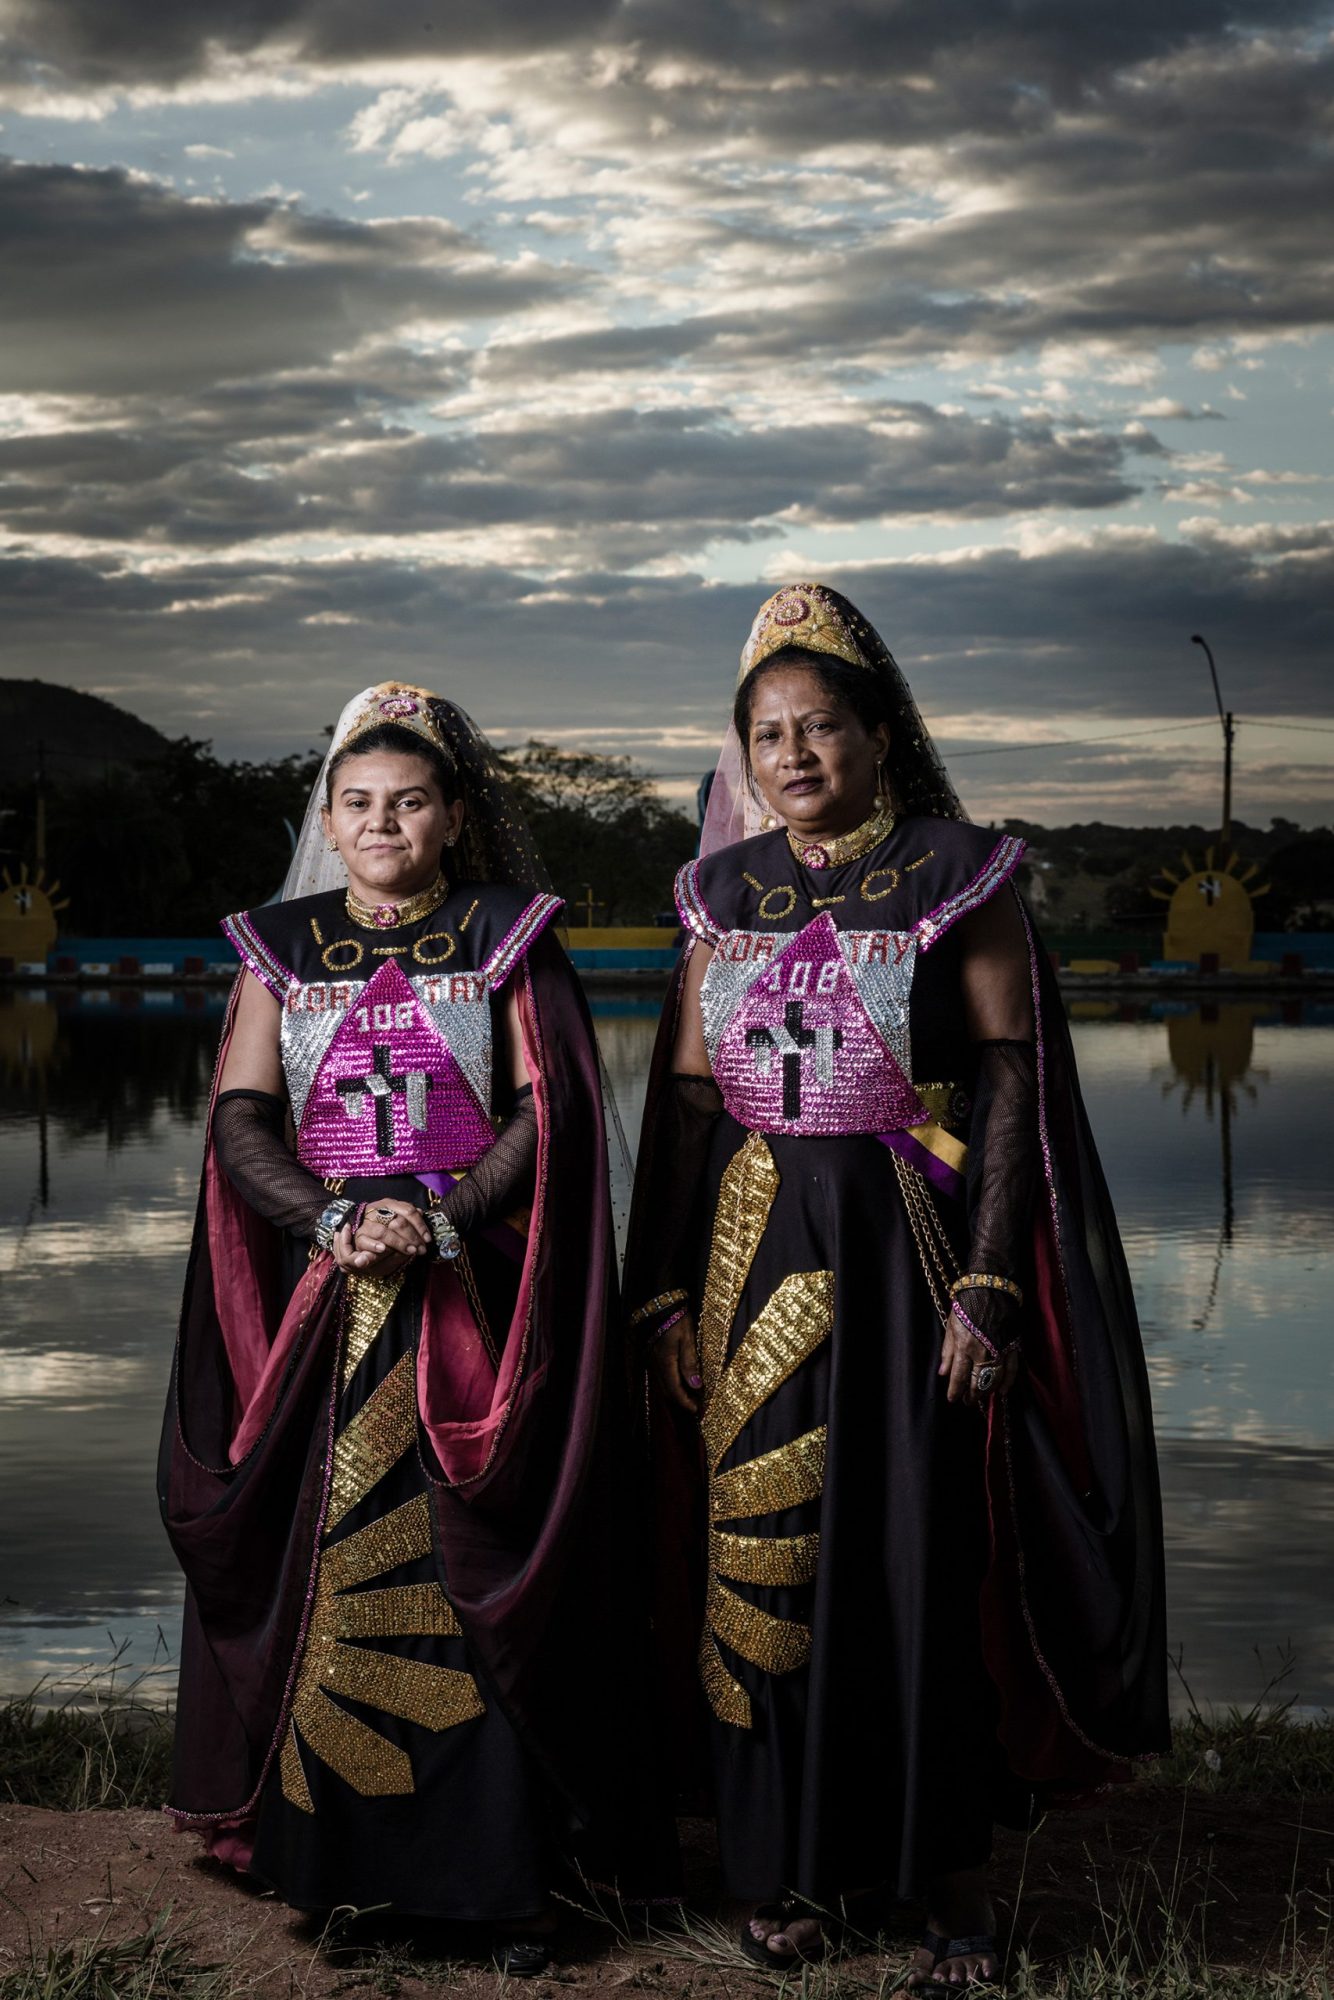 Women in ceremonial outfit.